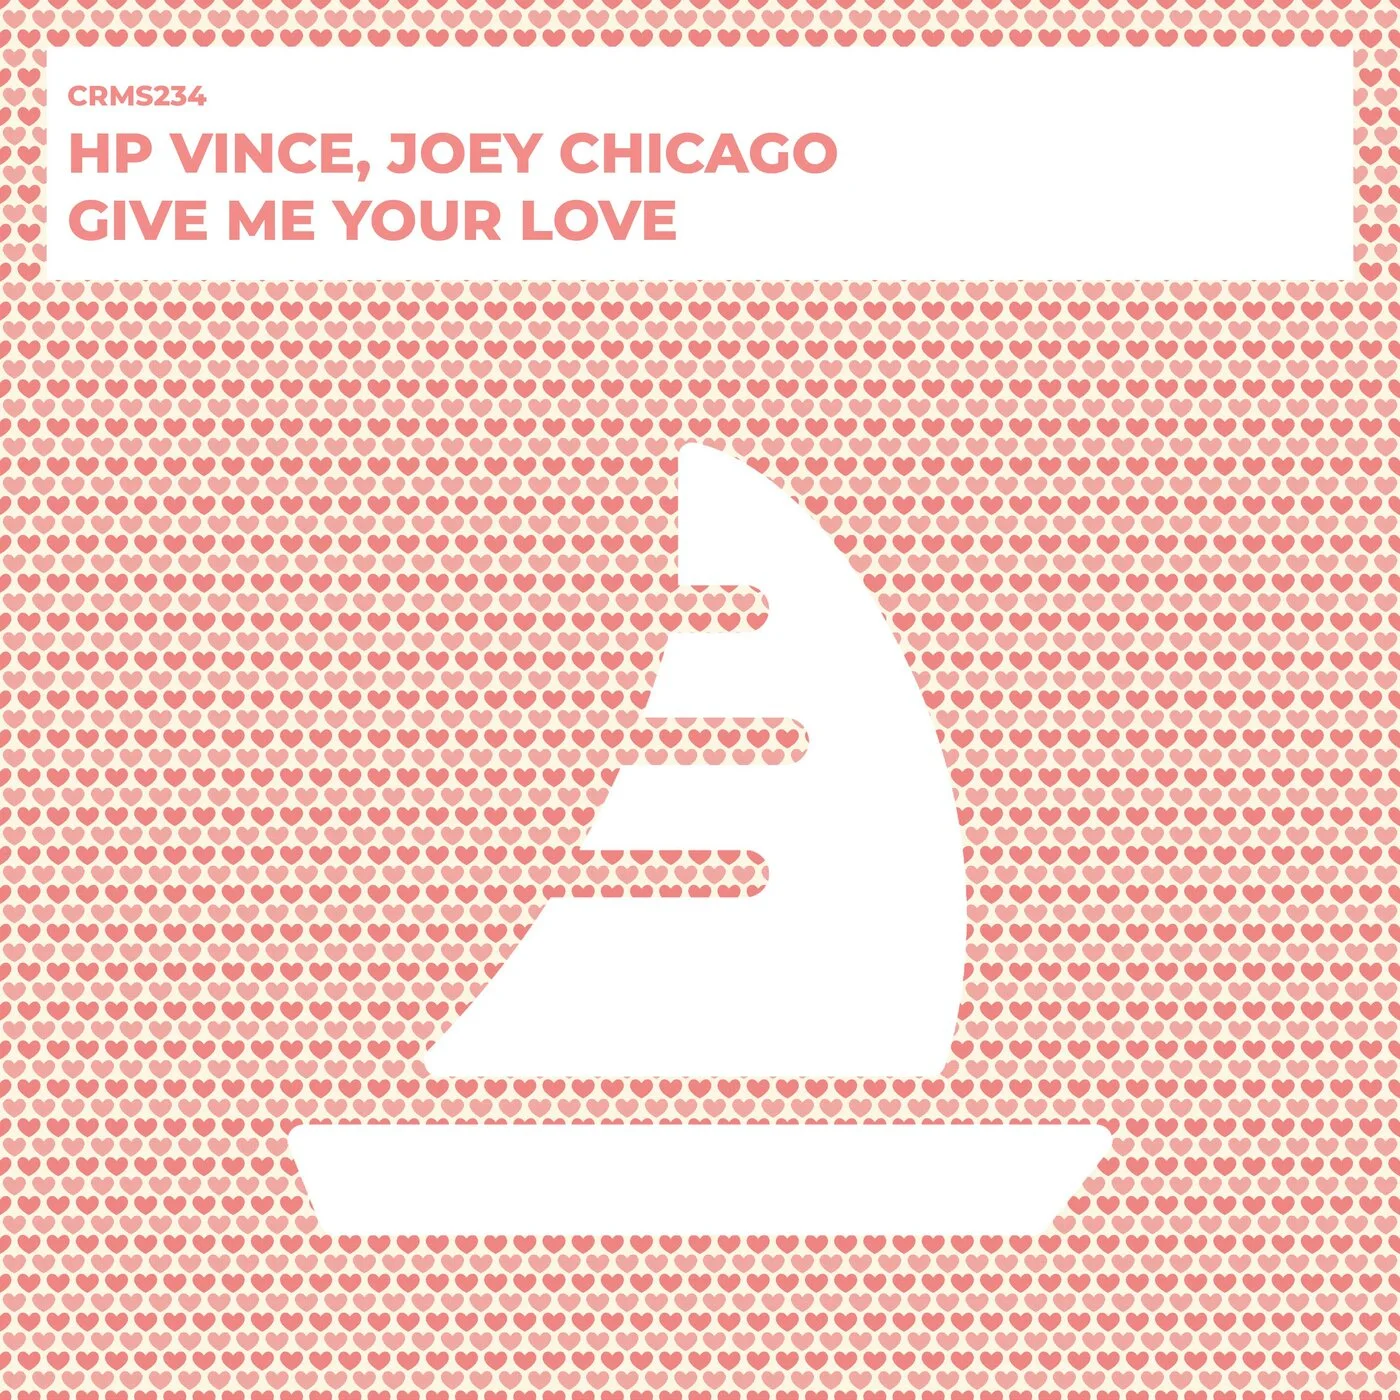 Hp Vince Joey Chicago - Give Me Your Love (Radio Edit)